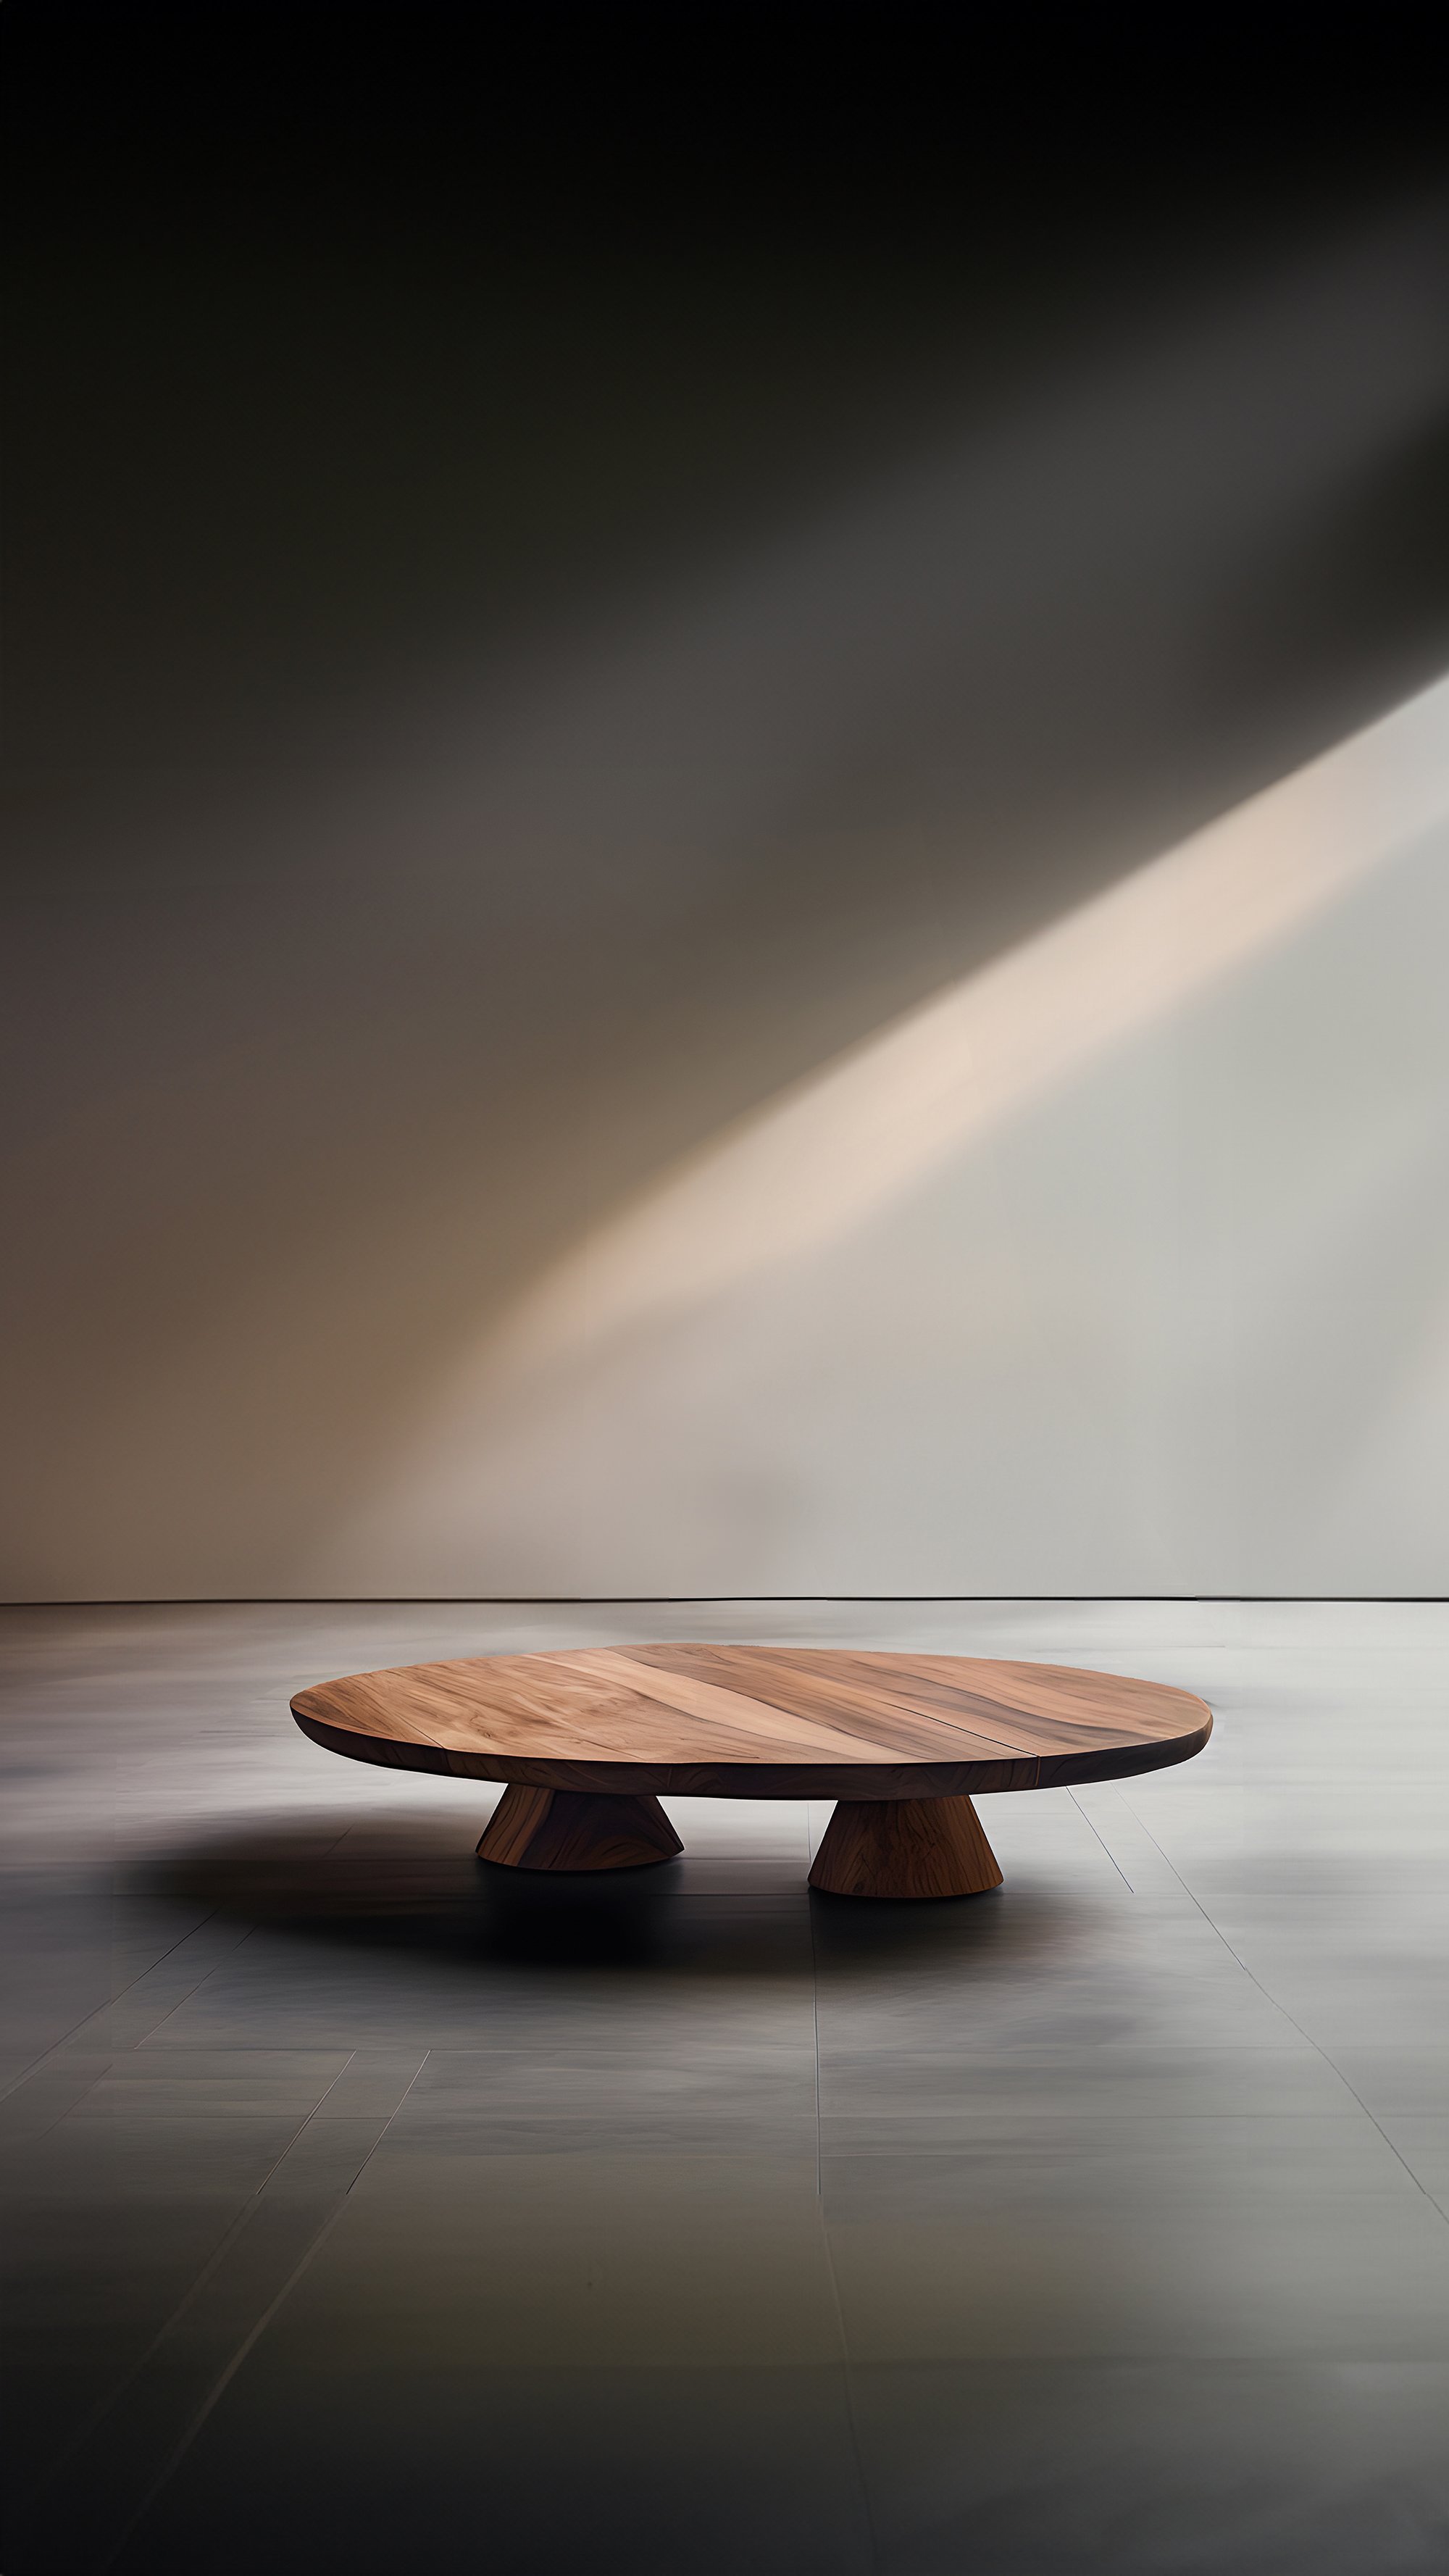 Sculptural Coffee Table Made of Solid Wood, Center Table Solace S45 by Joel Escalona — 8.jpg